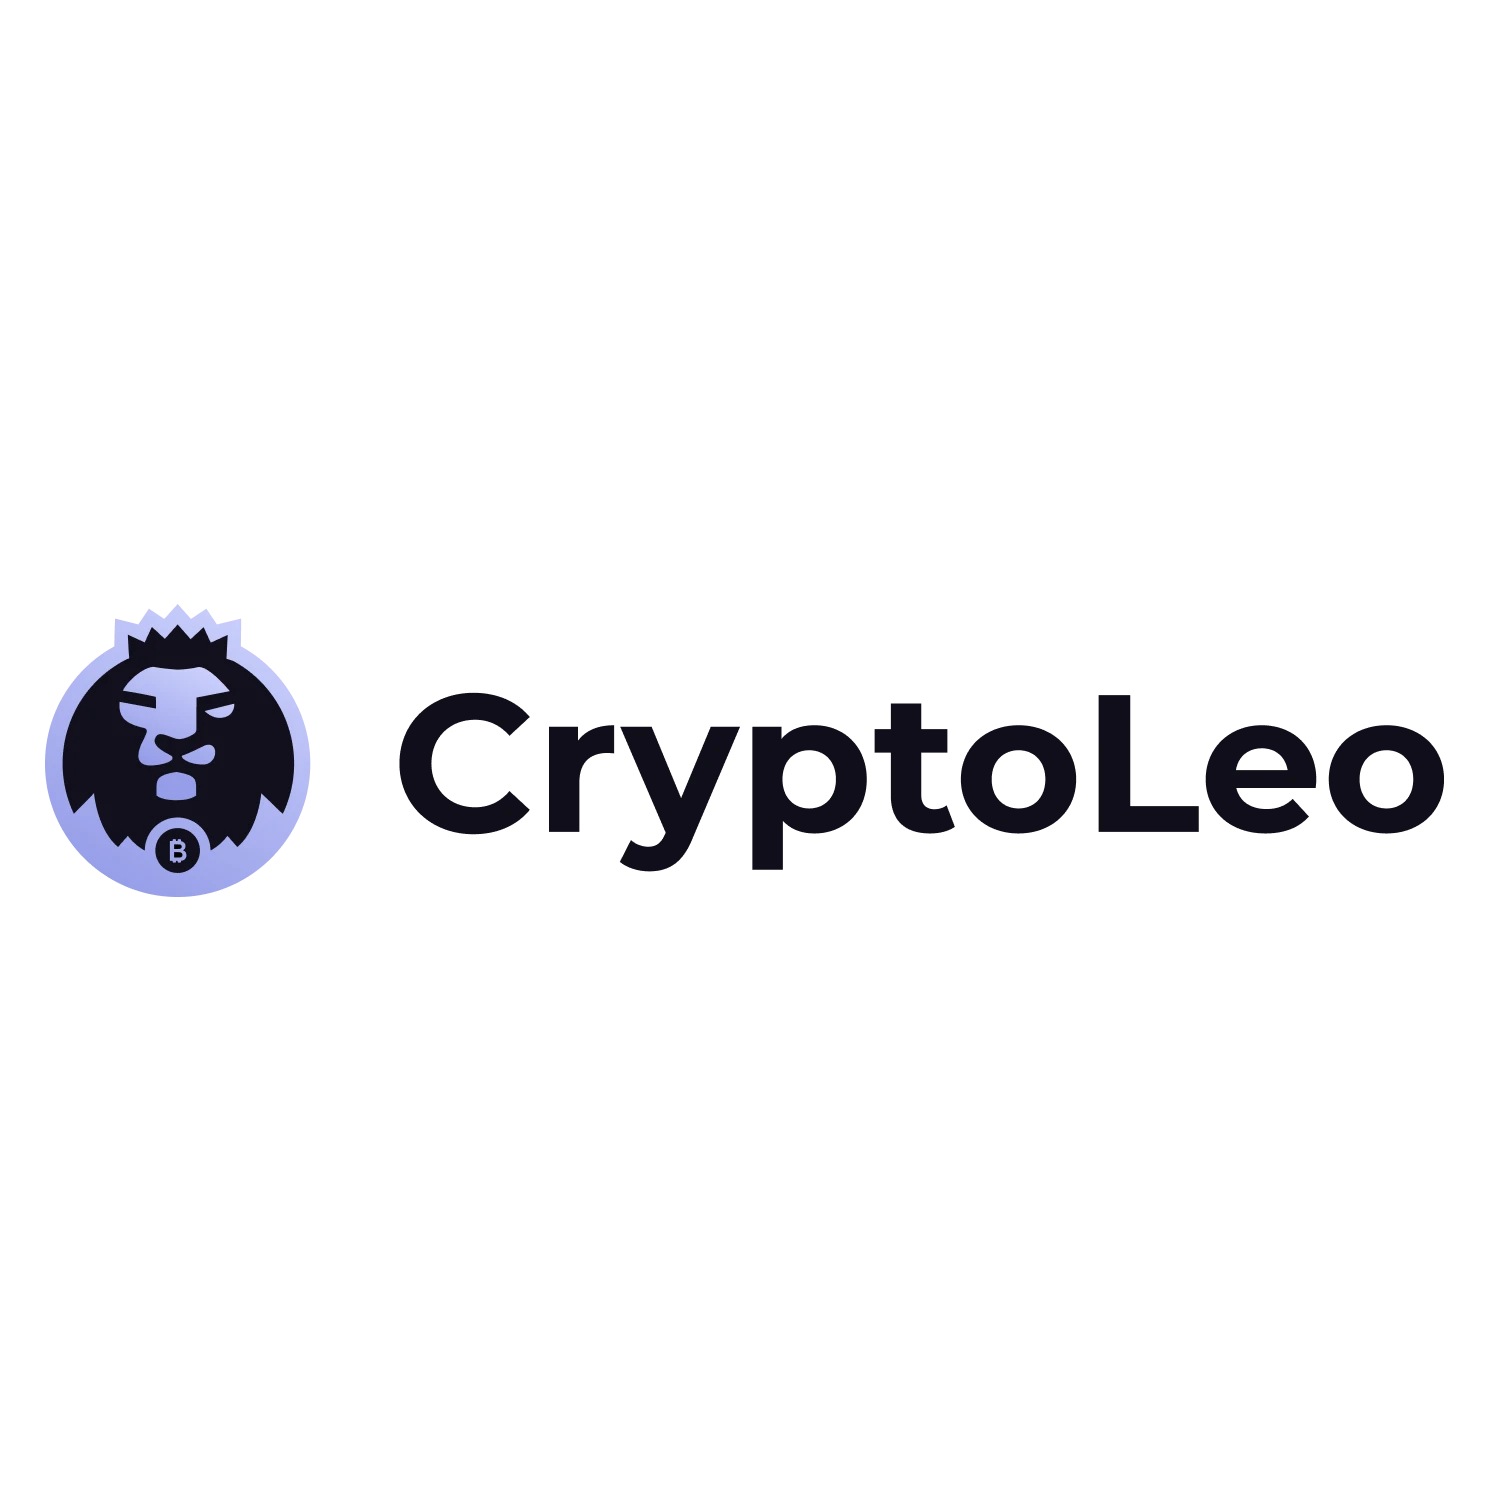 Cryptoleo Casino has a large casino games section, try it out.